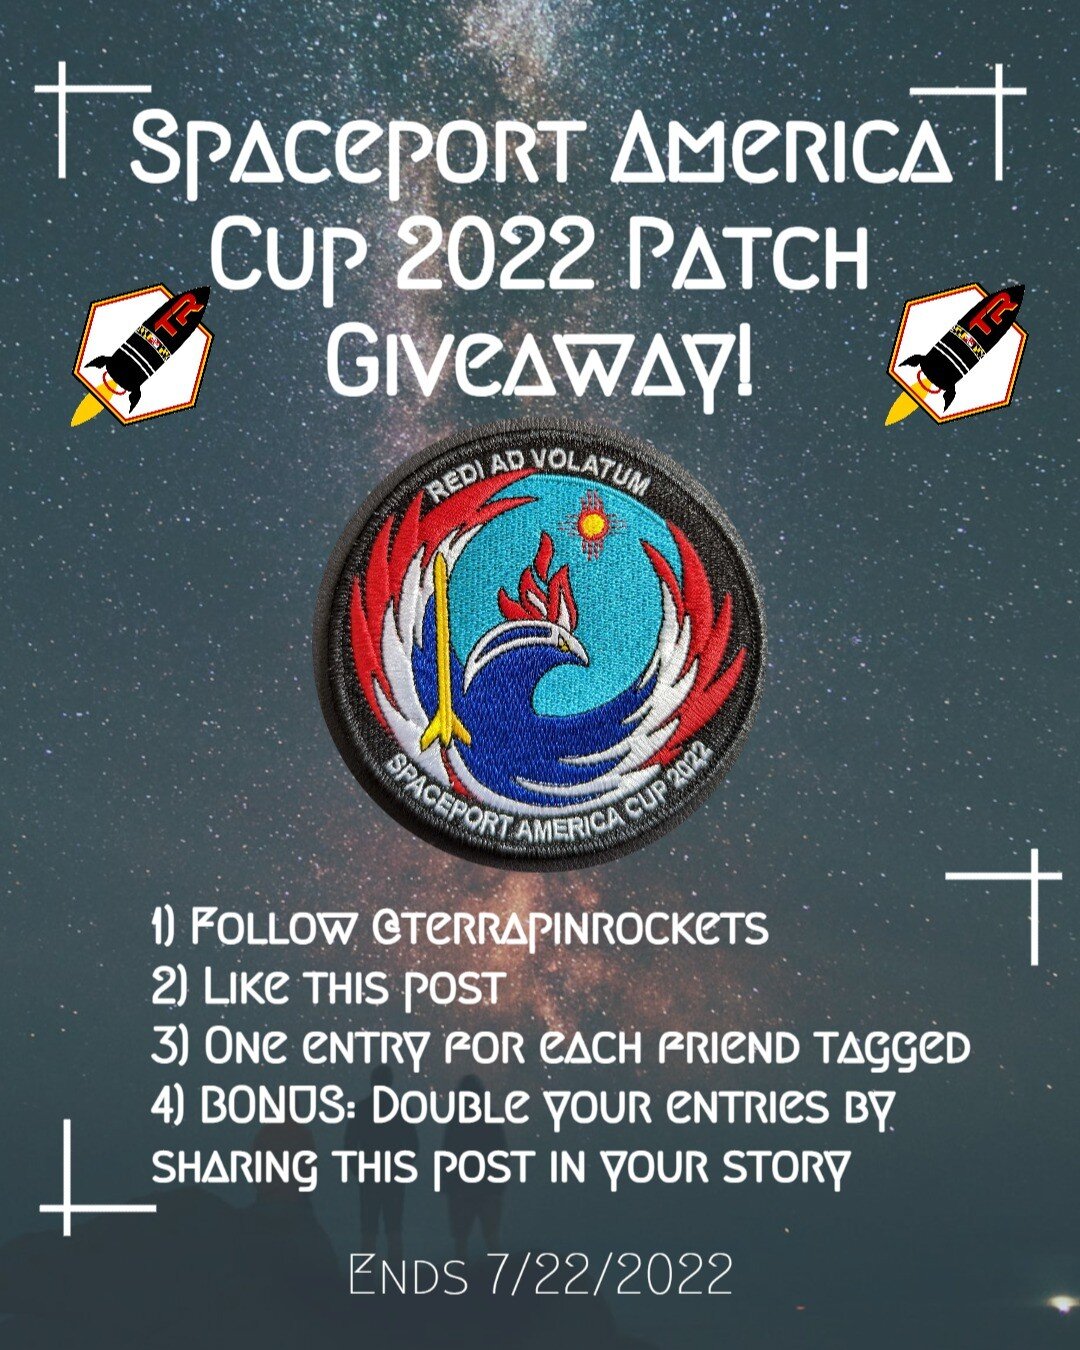 Win your very own Spaceport America Cup 2022 patch! TerpRockets will be giving away the commemorative patch of the 2022 SAC.

Maximum of five entries per person (before the bonus). One winner will be chosen at random and will be notified of their win